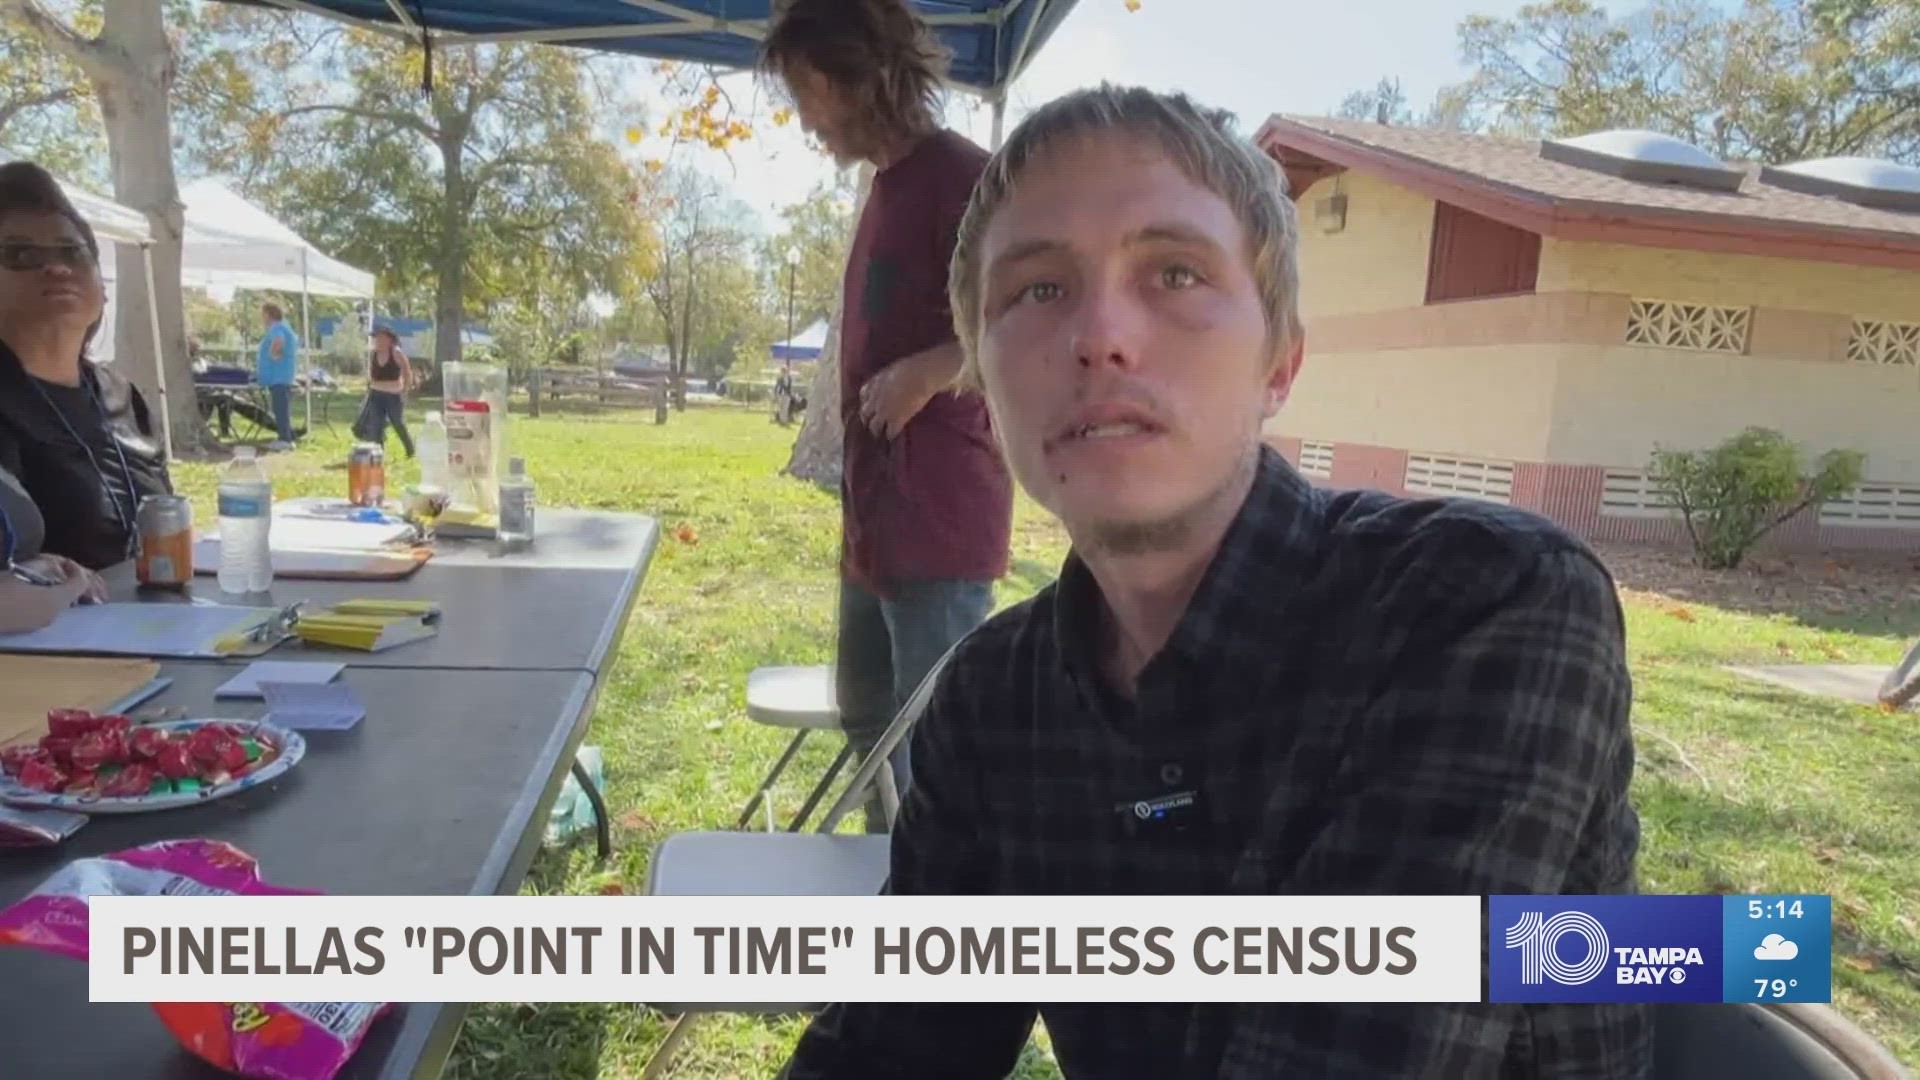 It’s part of an annual census called "Point in Time", the results of which will go a long way toward helping secure funding to address a growing need.